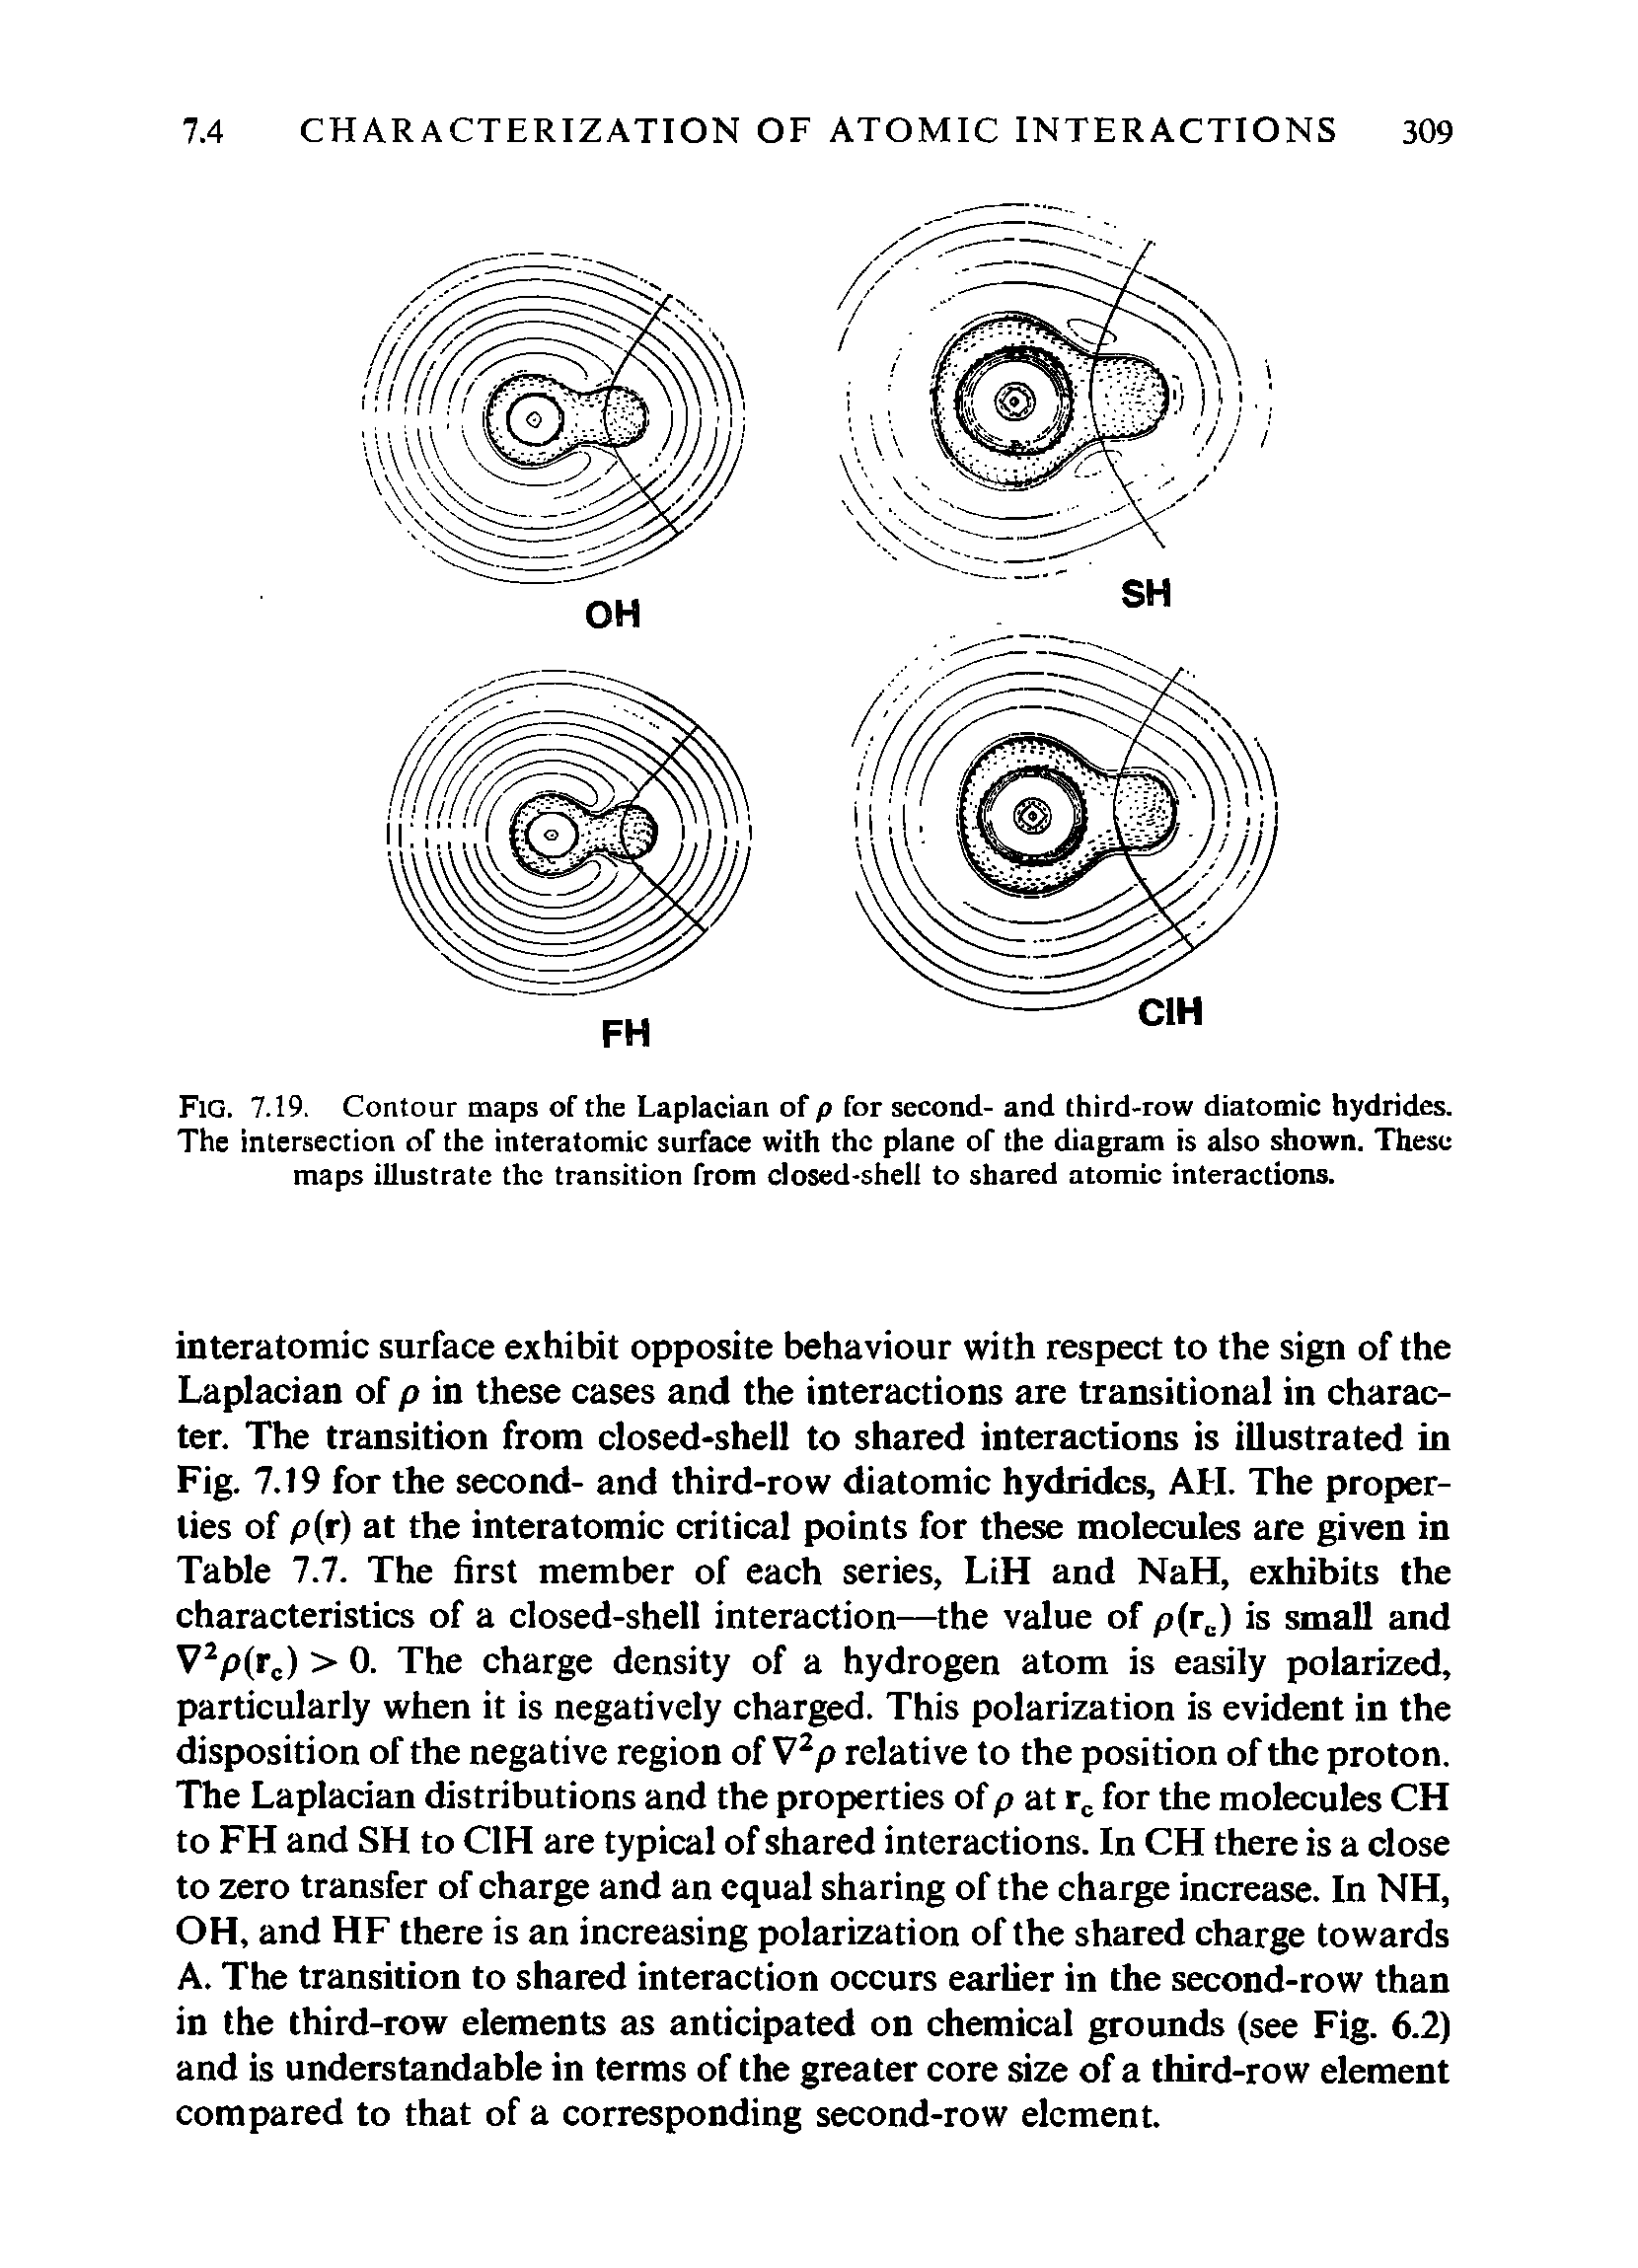 Fig. 7.19. Contour maps of the Laplacian of p for second- and third-row diatomic hydrides. The intersection of the interatomic surface with the plane of the diagram is also shown. These maps illustrate the transition from closed-shell to shared atomic interactions.